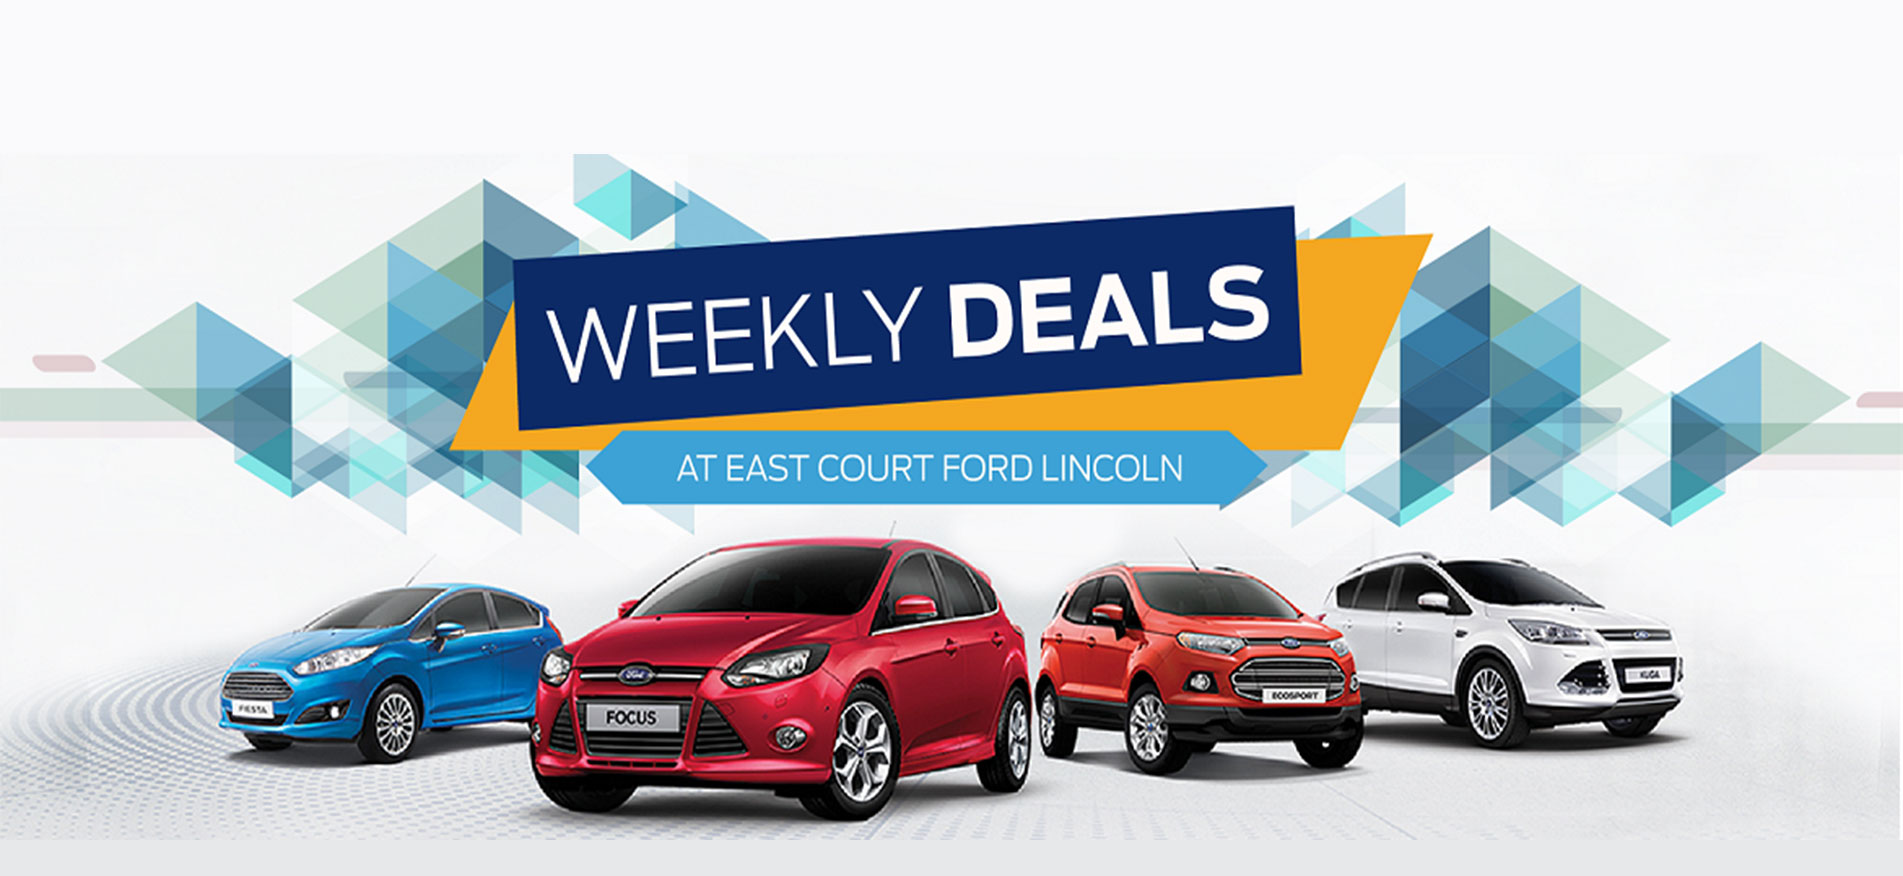 East court ford lincoln sales #6